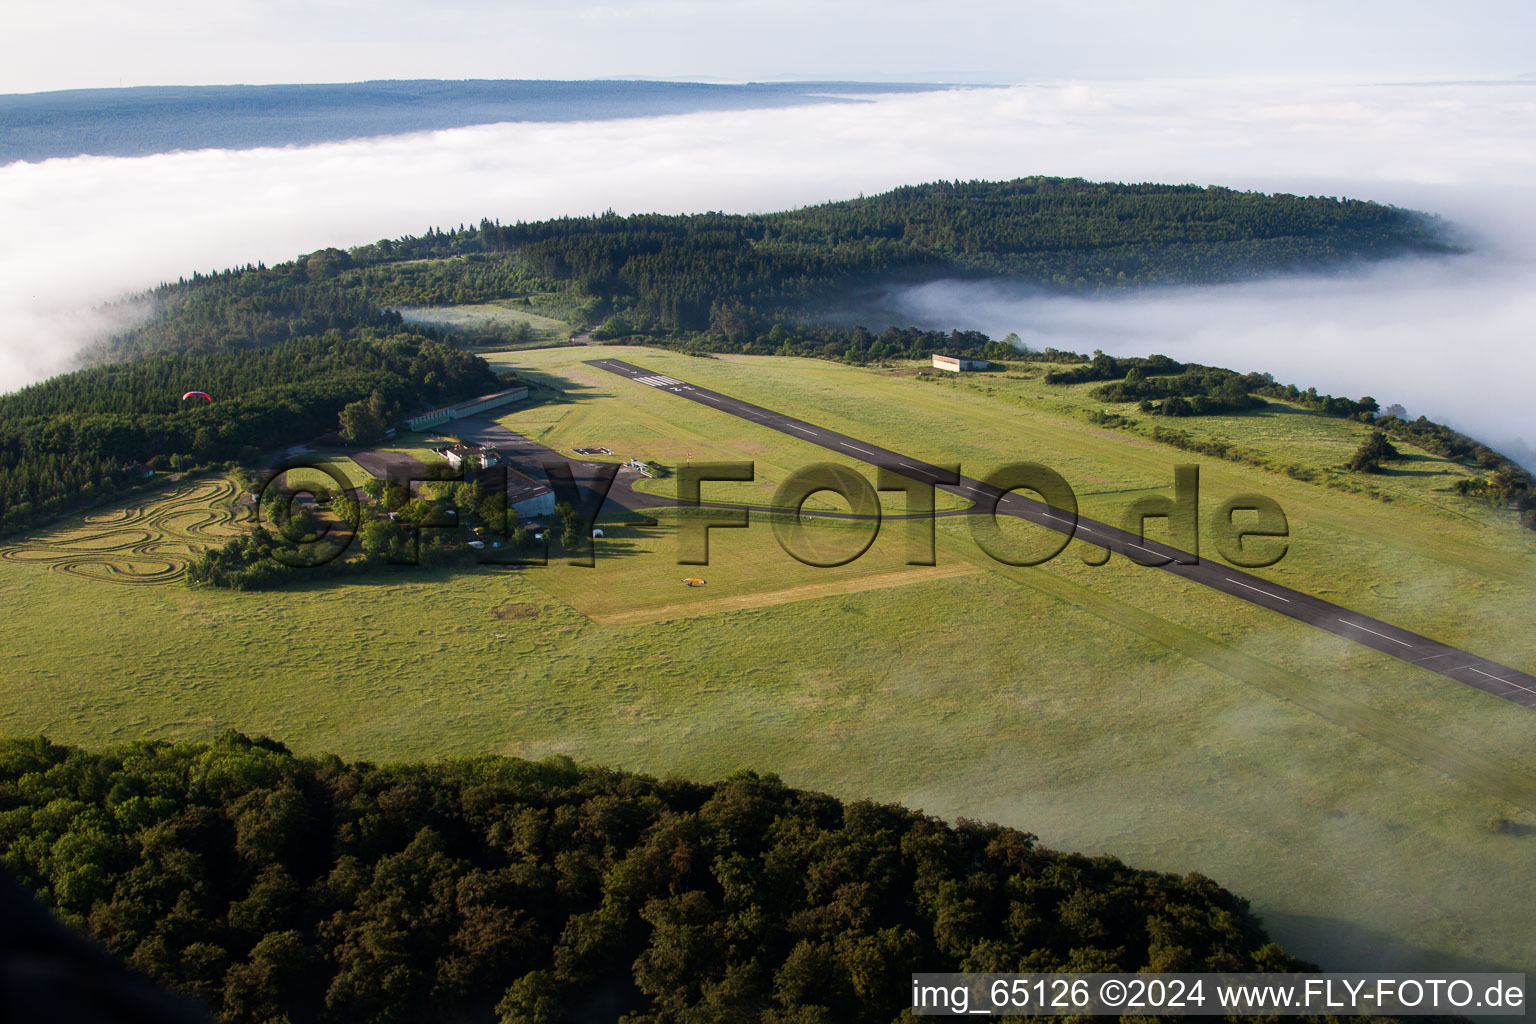 Aerial view of Runway with tarmac terrain of airfield Hoexter-Holzminden with morning mist in the district Brenkhausen in Hoexter in the state North Rhine-Westphalia, Germany